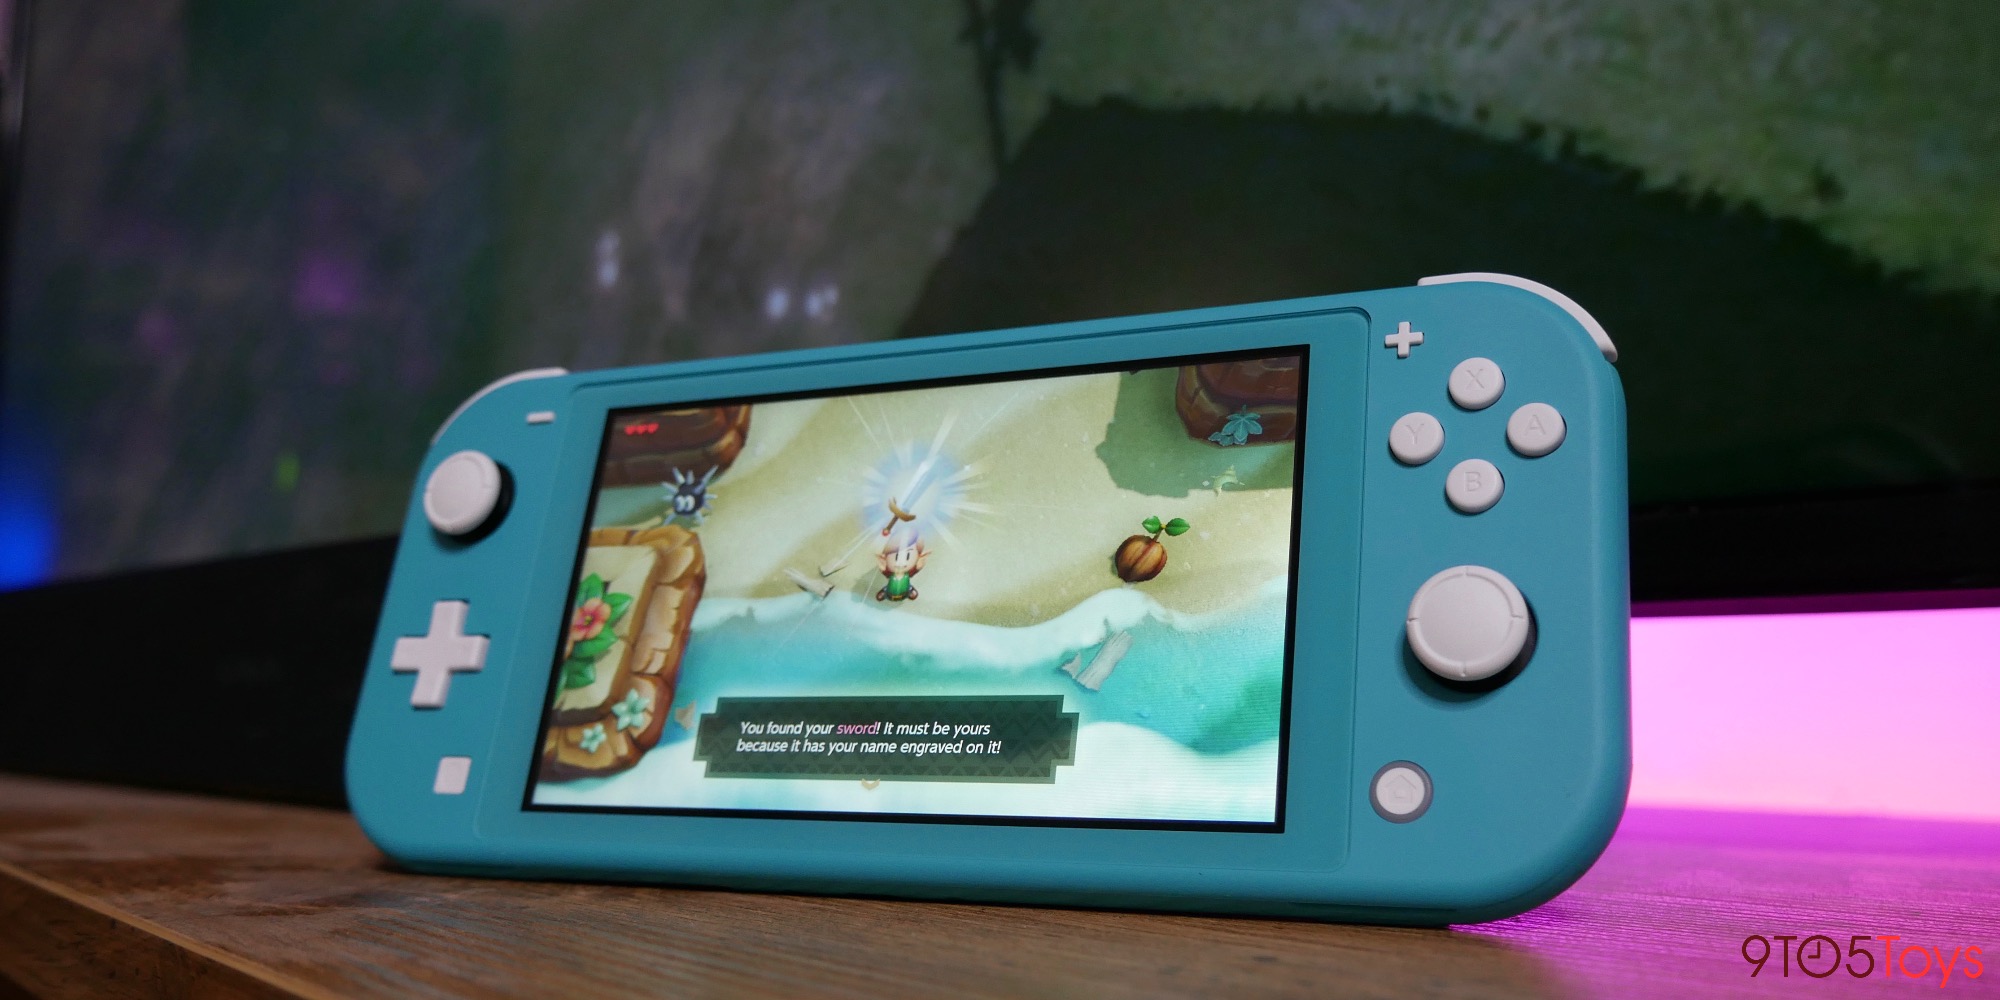 Nintendo Switch Lite drops to $185 with a bonus $25 gift card